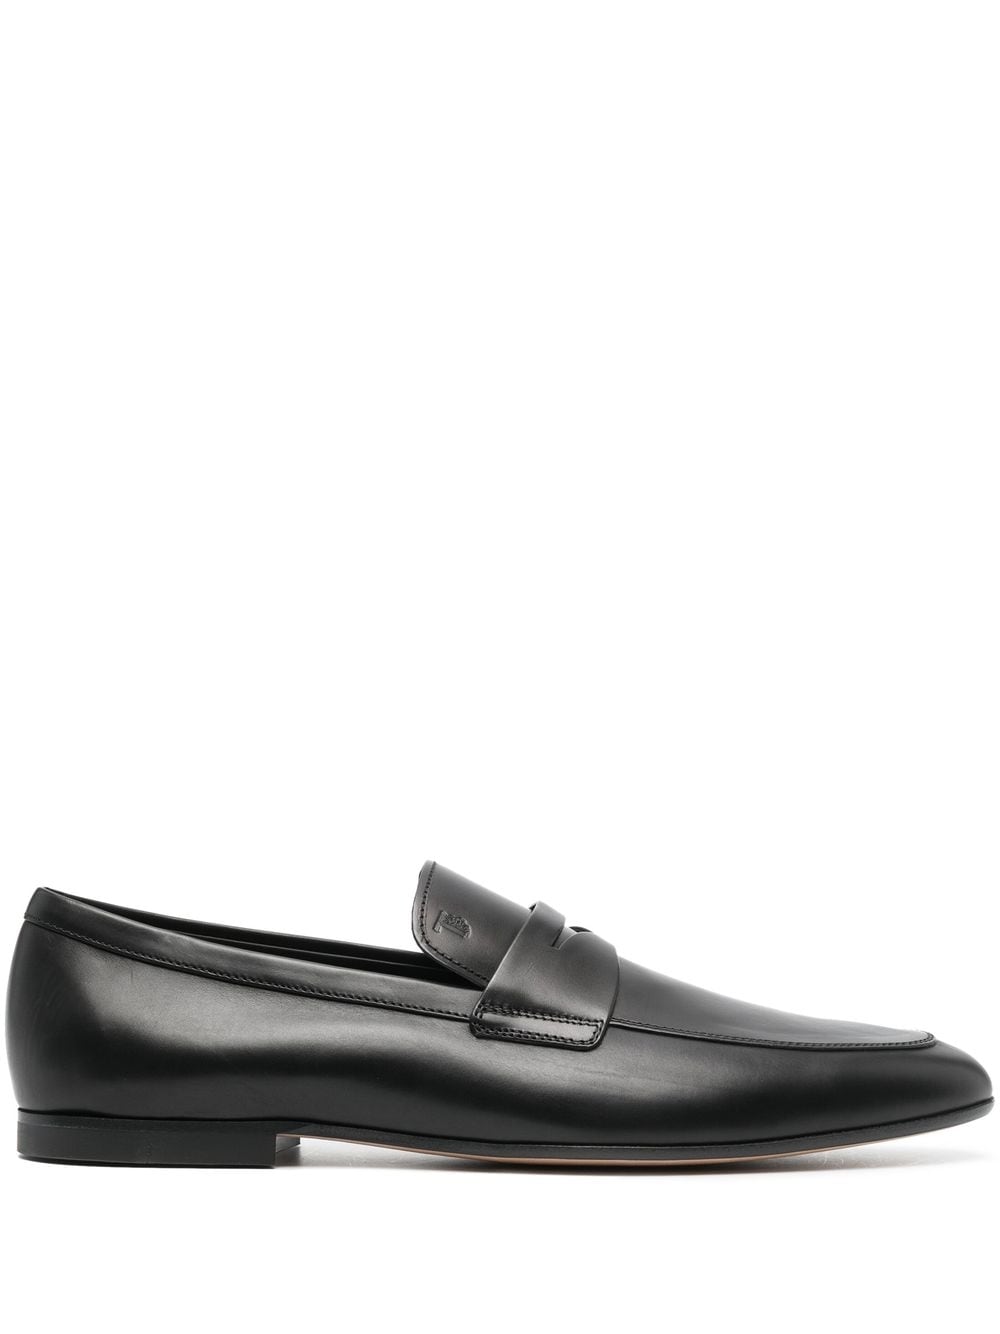 TOD'S Fashionably Timeless Black Leather Slip-On Loafers for Men